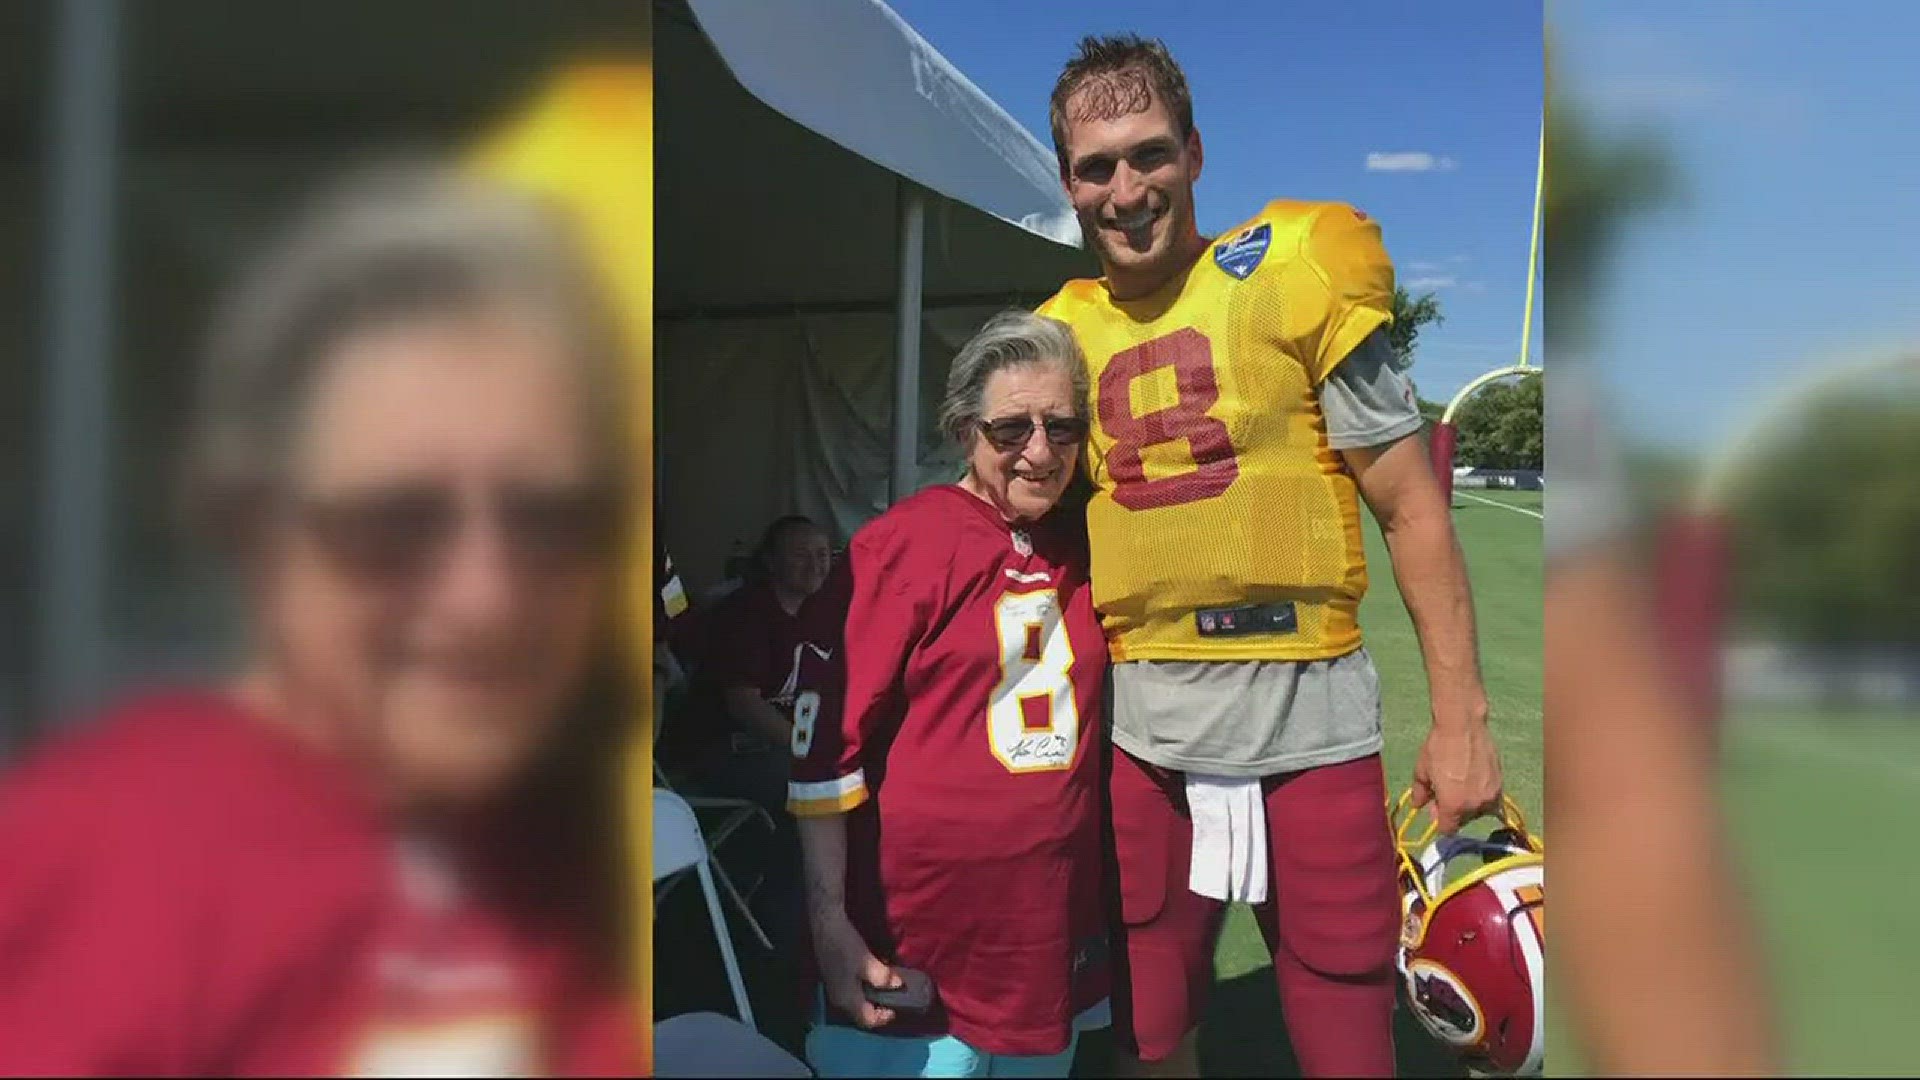 93-year-old has seen or heard almost every game the Burgundy and Gold have played -- since 1941.